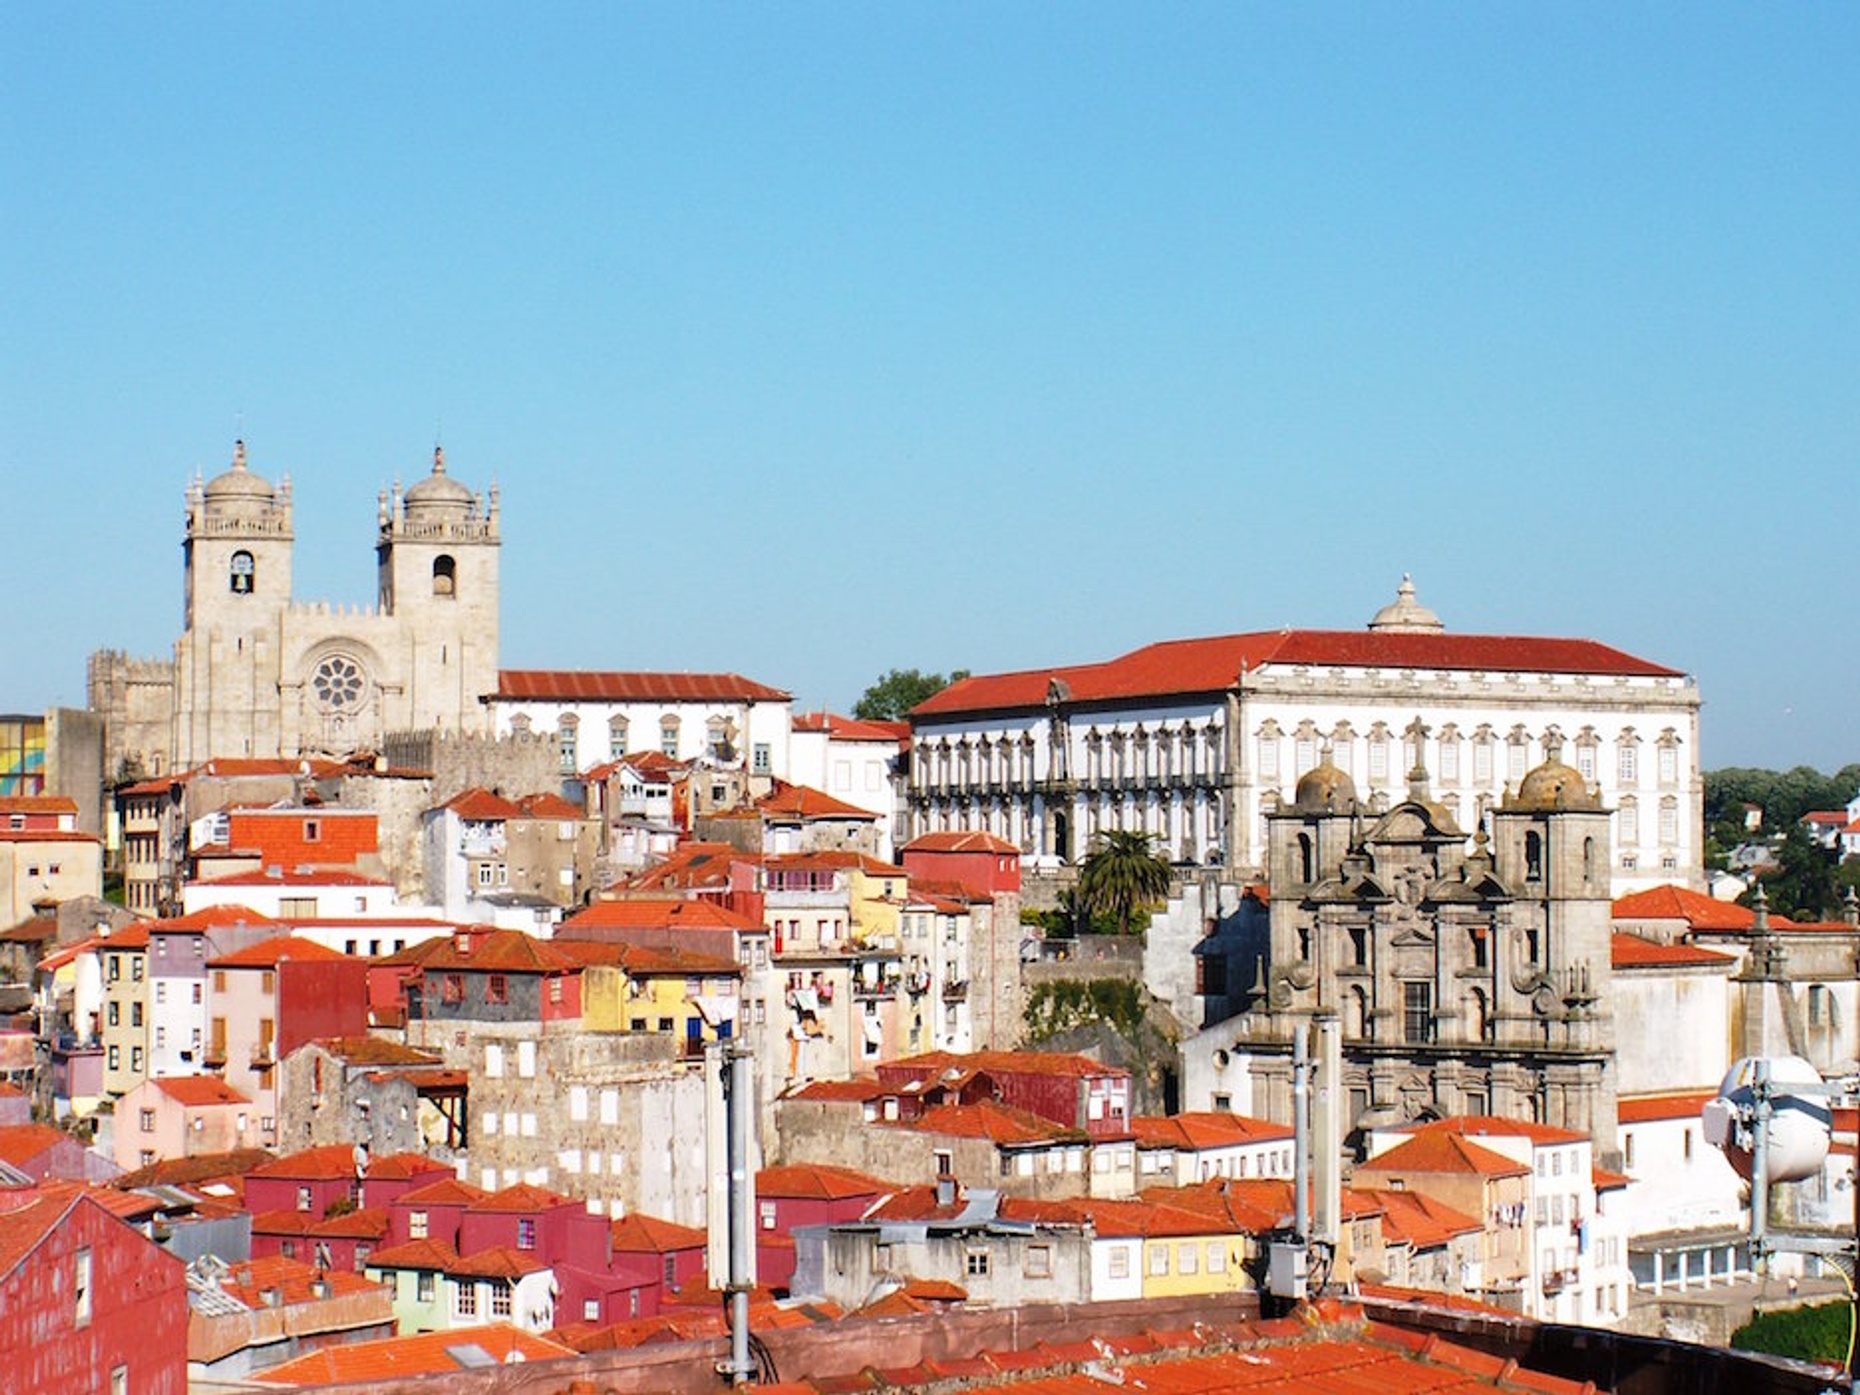 Guided Afternoon Walking Tour of Porto